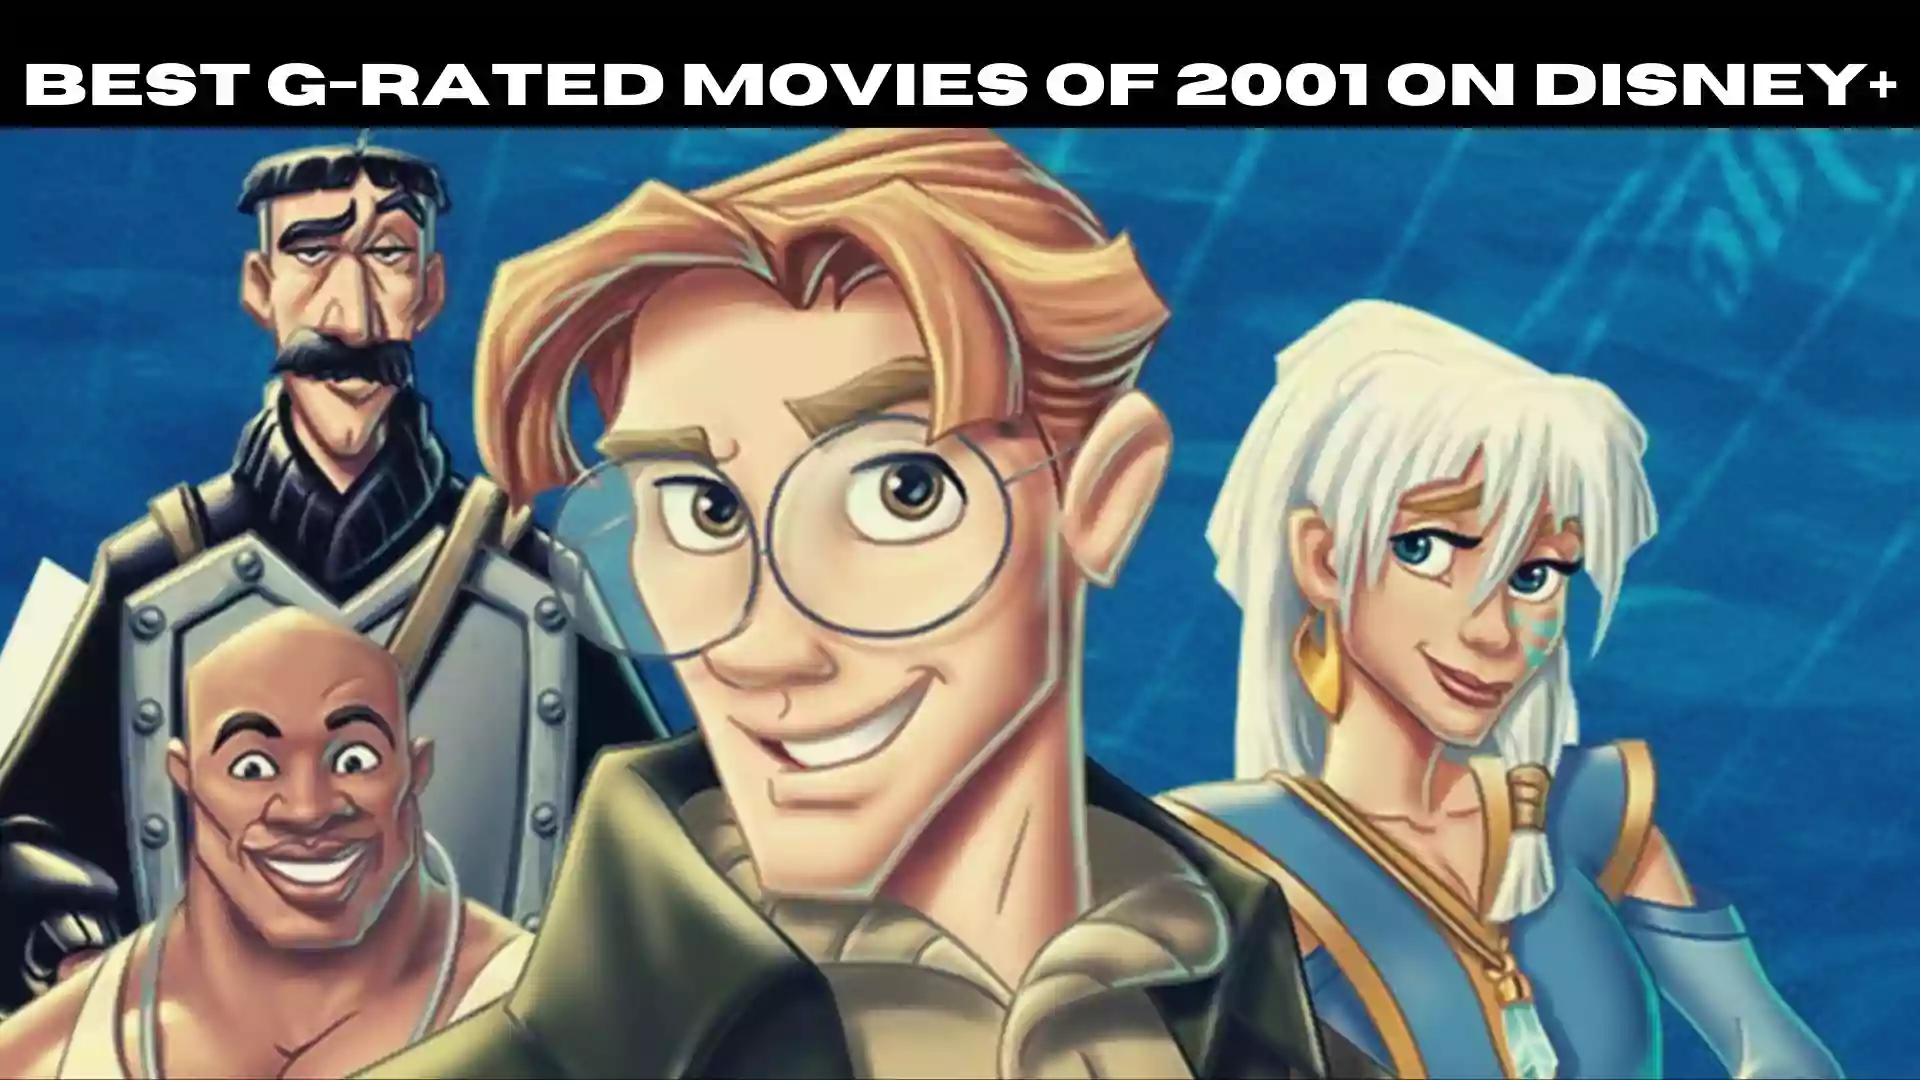 Best G-Rated Movies of 2001 on Disney+